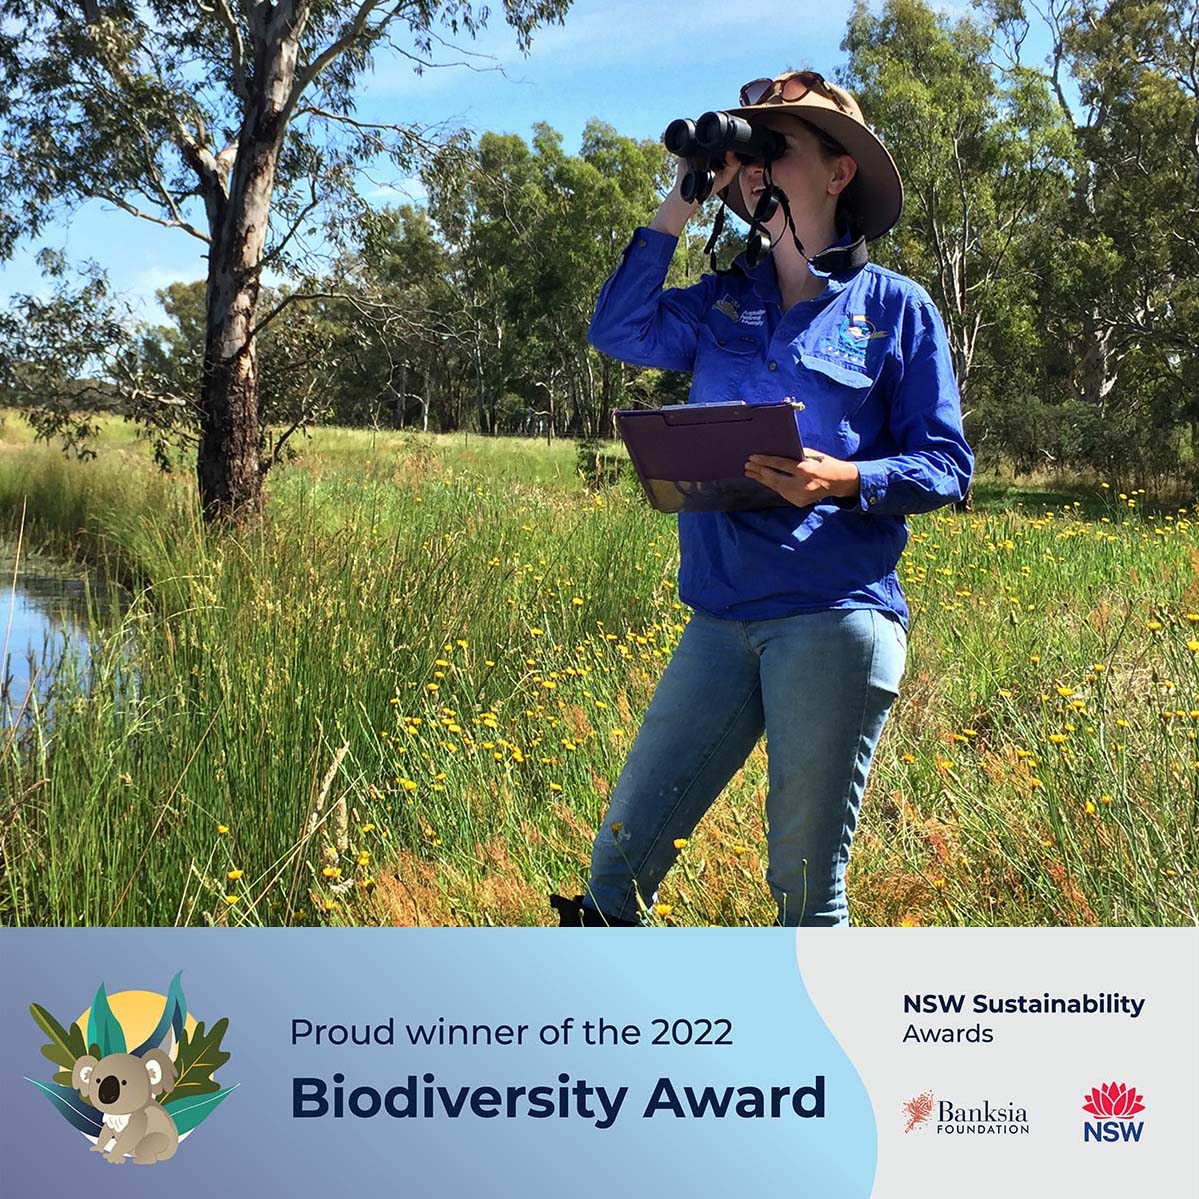 We are delighted to announce that we are an Award Winner for the 2022 @BanksiaFdn Sustainability Awards! 🥇🦜 BirdCast, which helps farmers predict bird life in woodlands on their properties, was awarded the NSW Biodiversity Award. Congrats to all the projects involved this year!